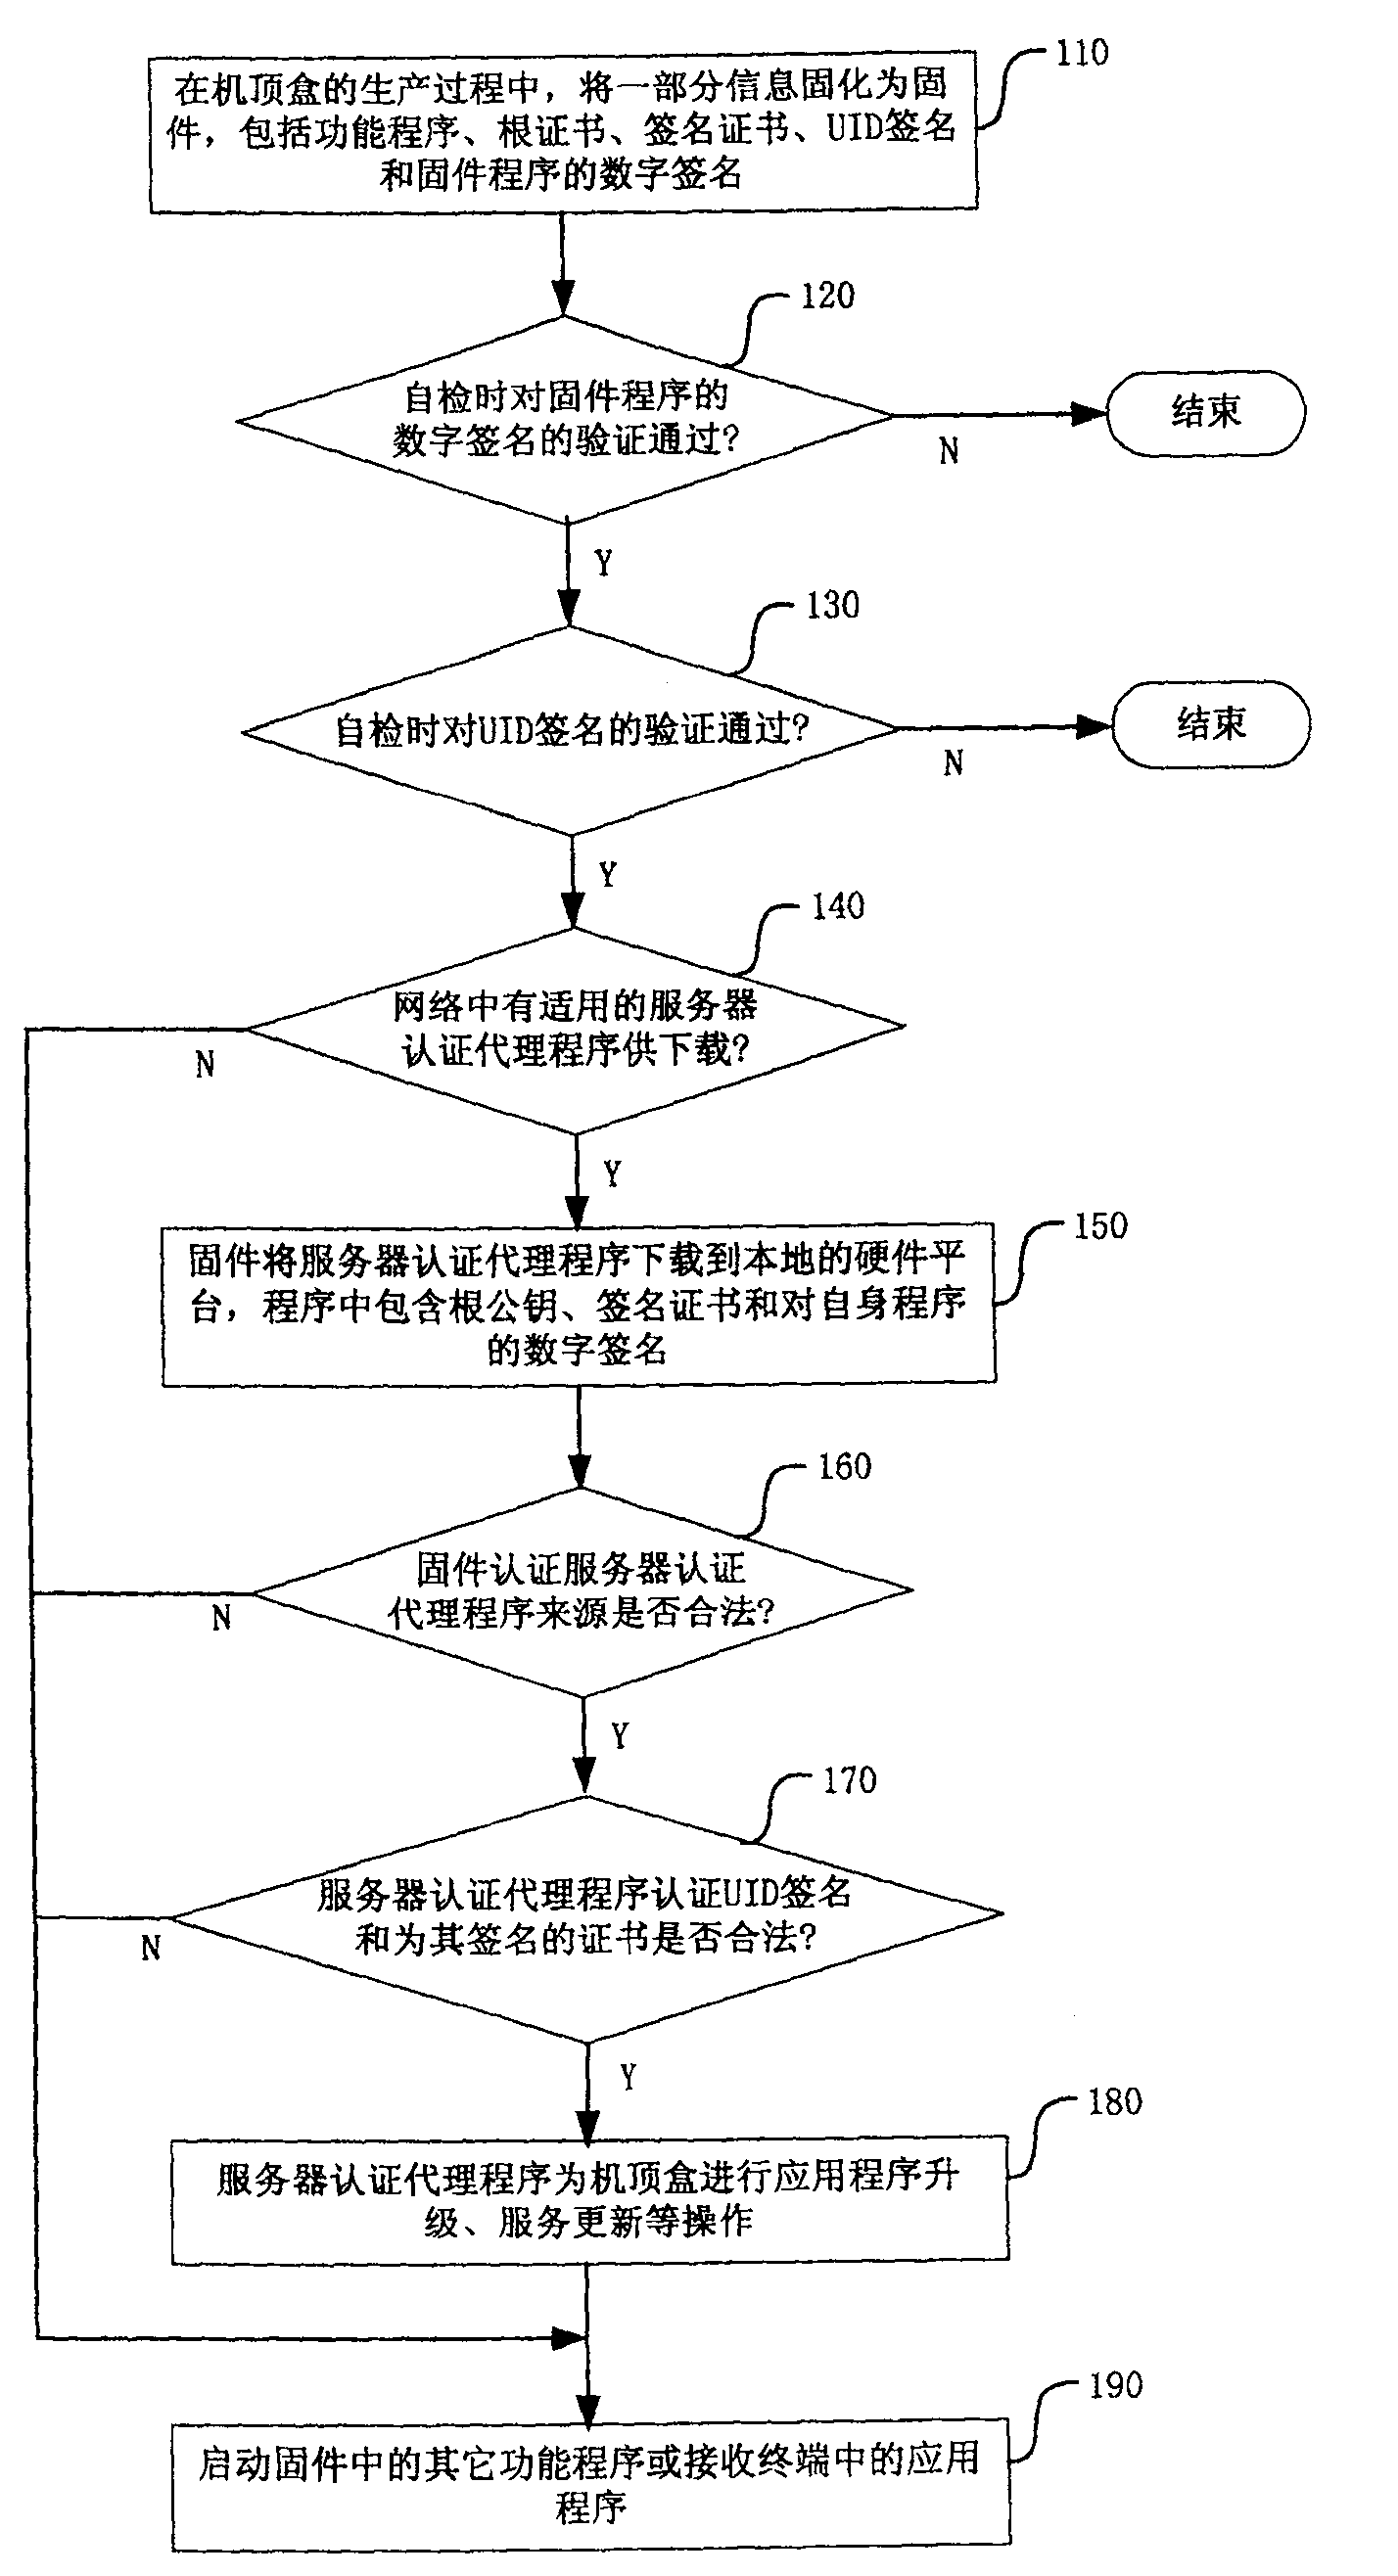 Method and system for authenticating legality of receiving terminal in unidirectional network